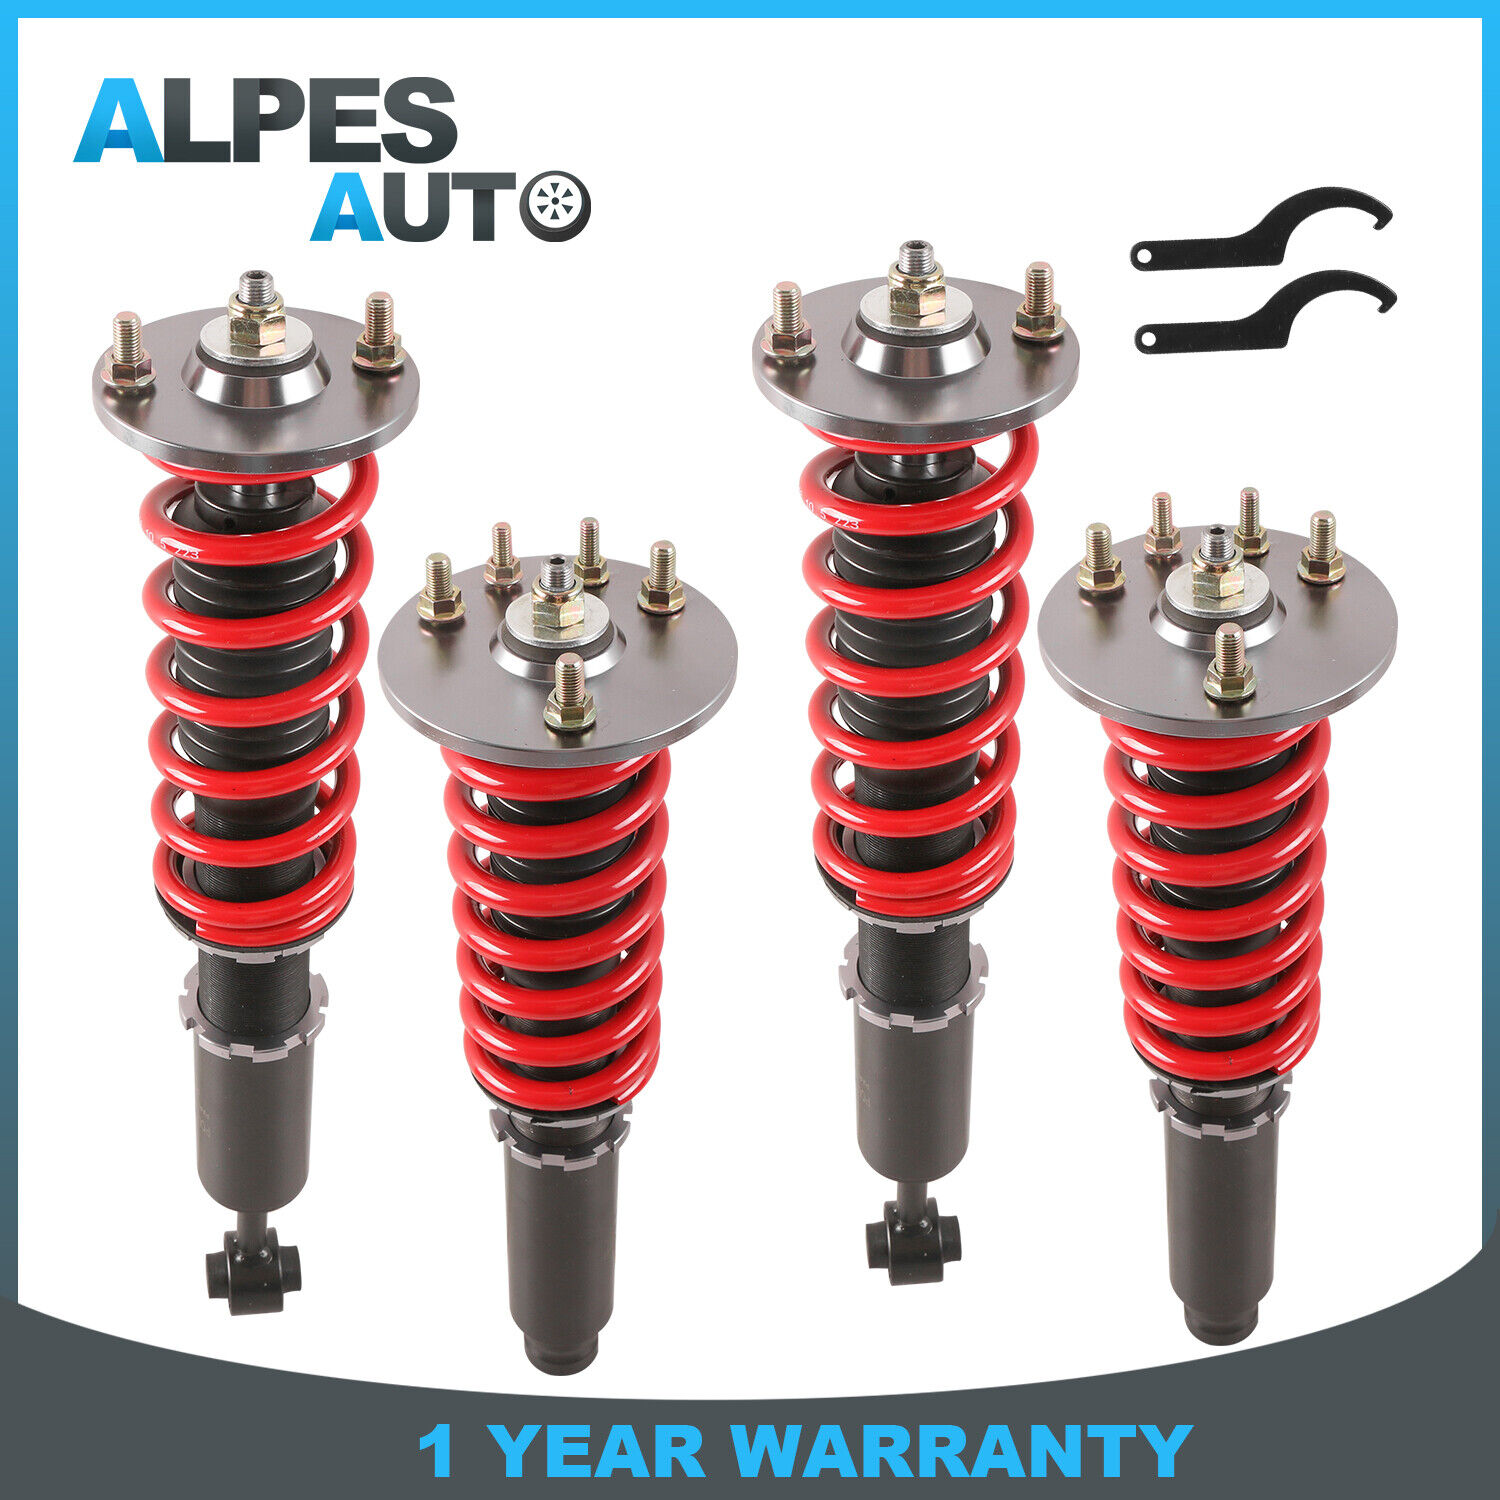 2x Front + 2x Rear Coilovers Struts For 1998-02 Honda Accord Acura TL 2001-03 CL